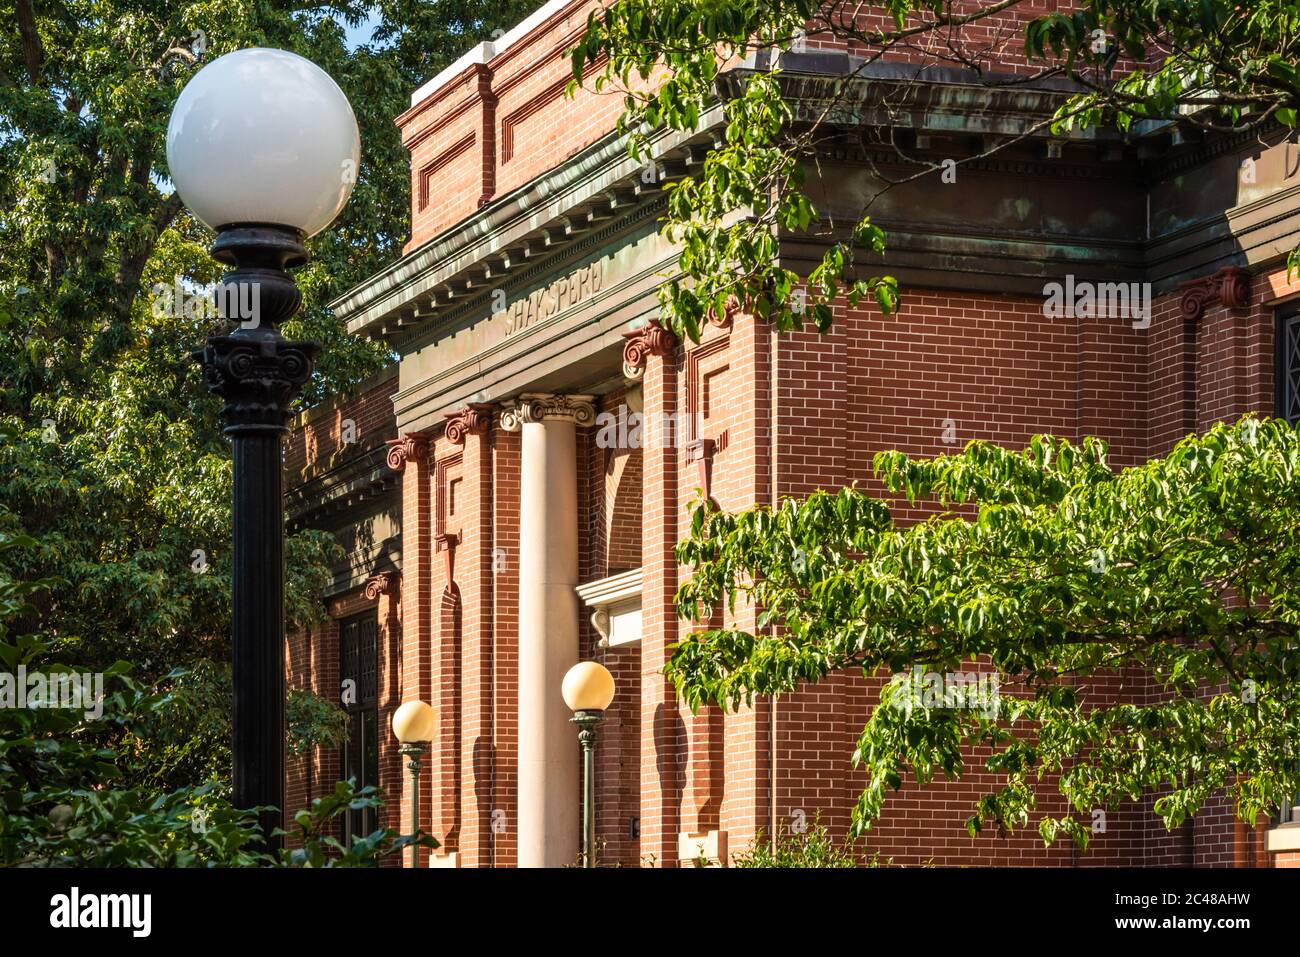 Administration Building, built in 1907, at the University of Georgia in Athens, Georgia. (USA) Stock Photo